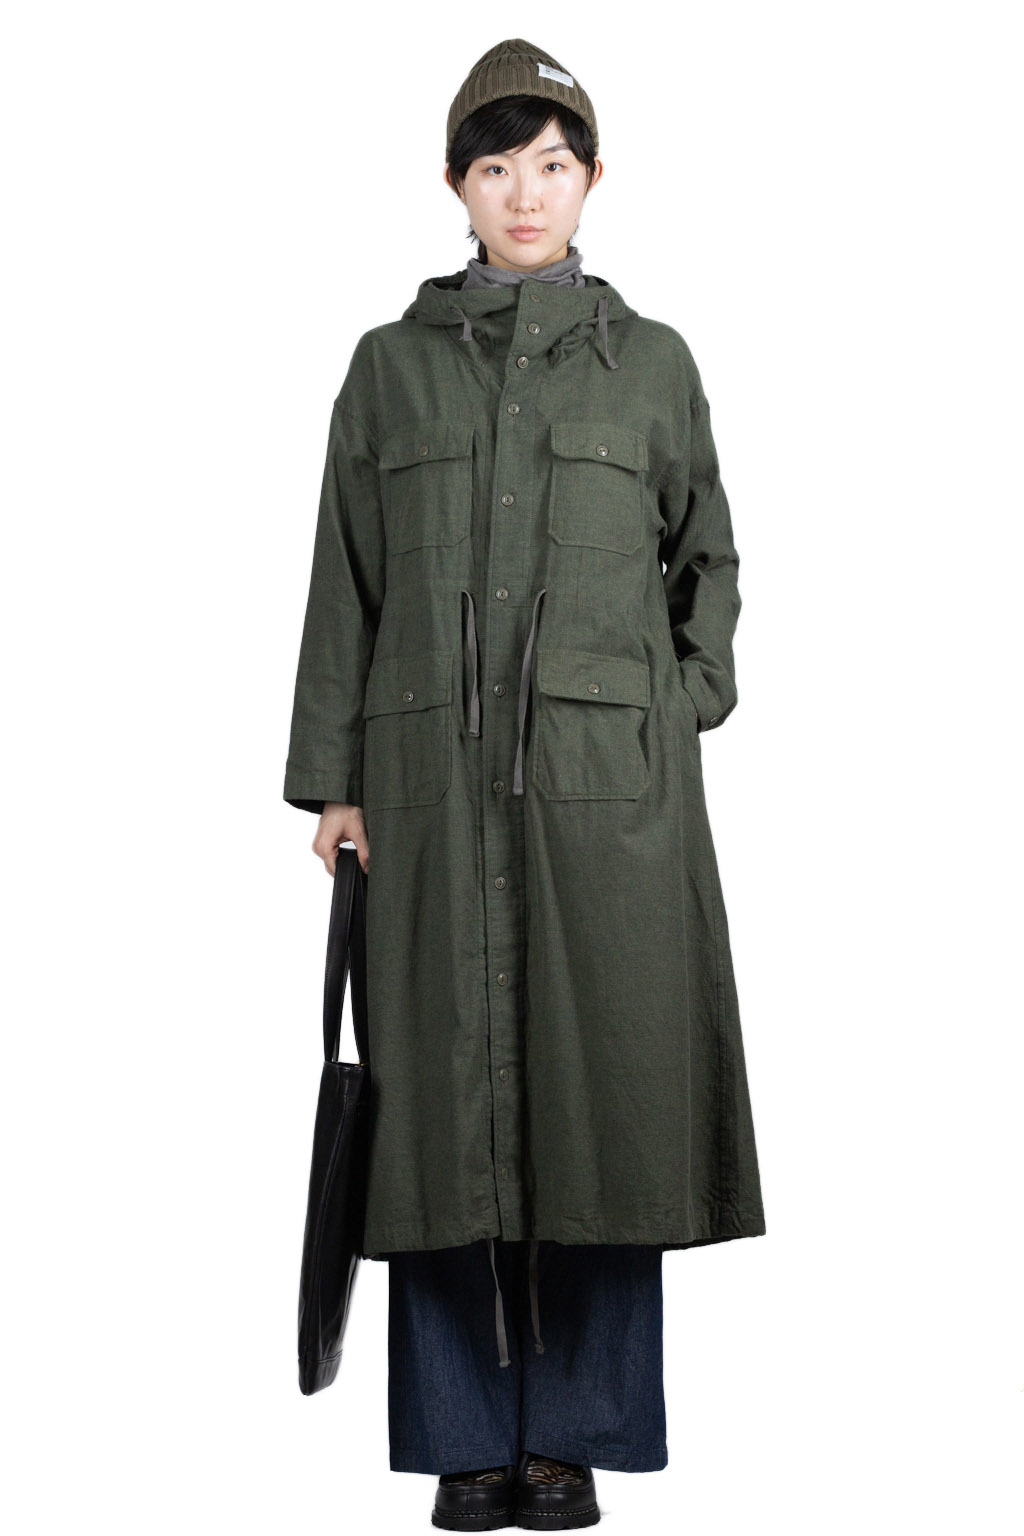 Engineered Garments Cagoule Dress Jacket - Olive Solid Cotton Flannel